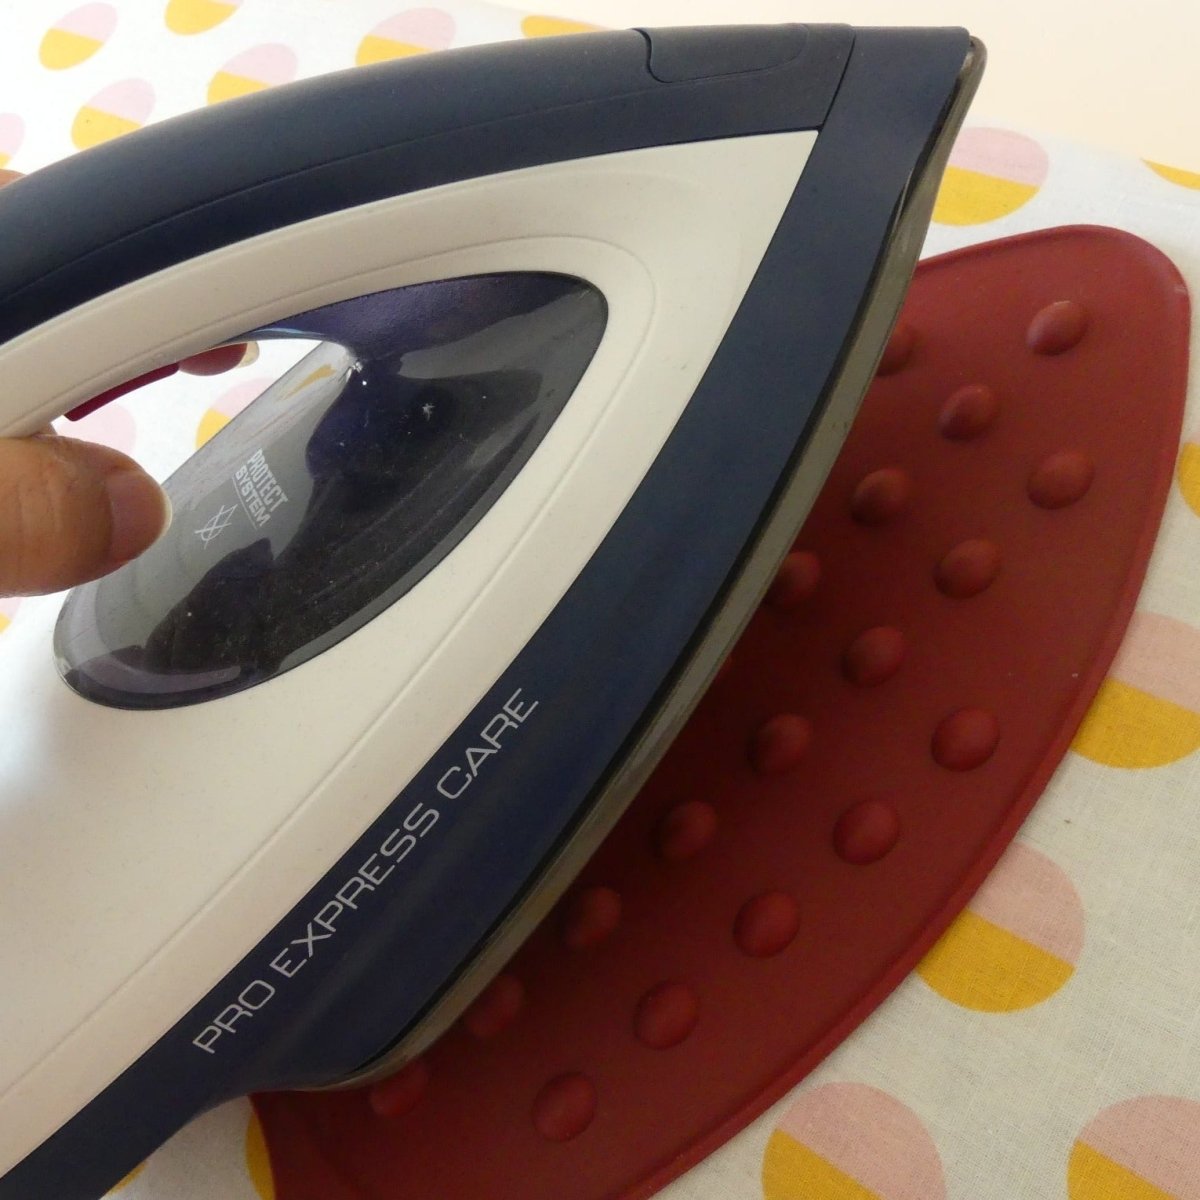 Iron Rest - A Flexible Silicone Pad for Hot Irons – MadamSew